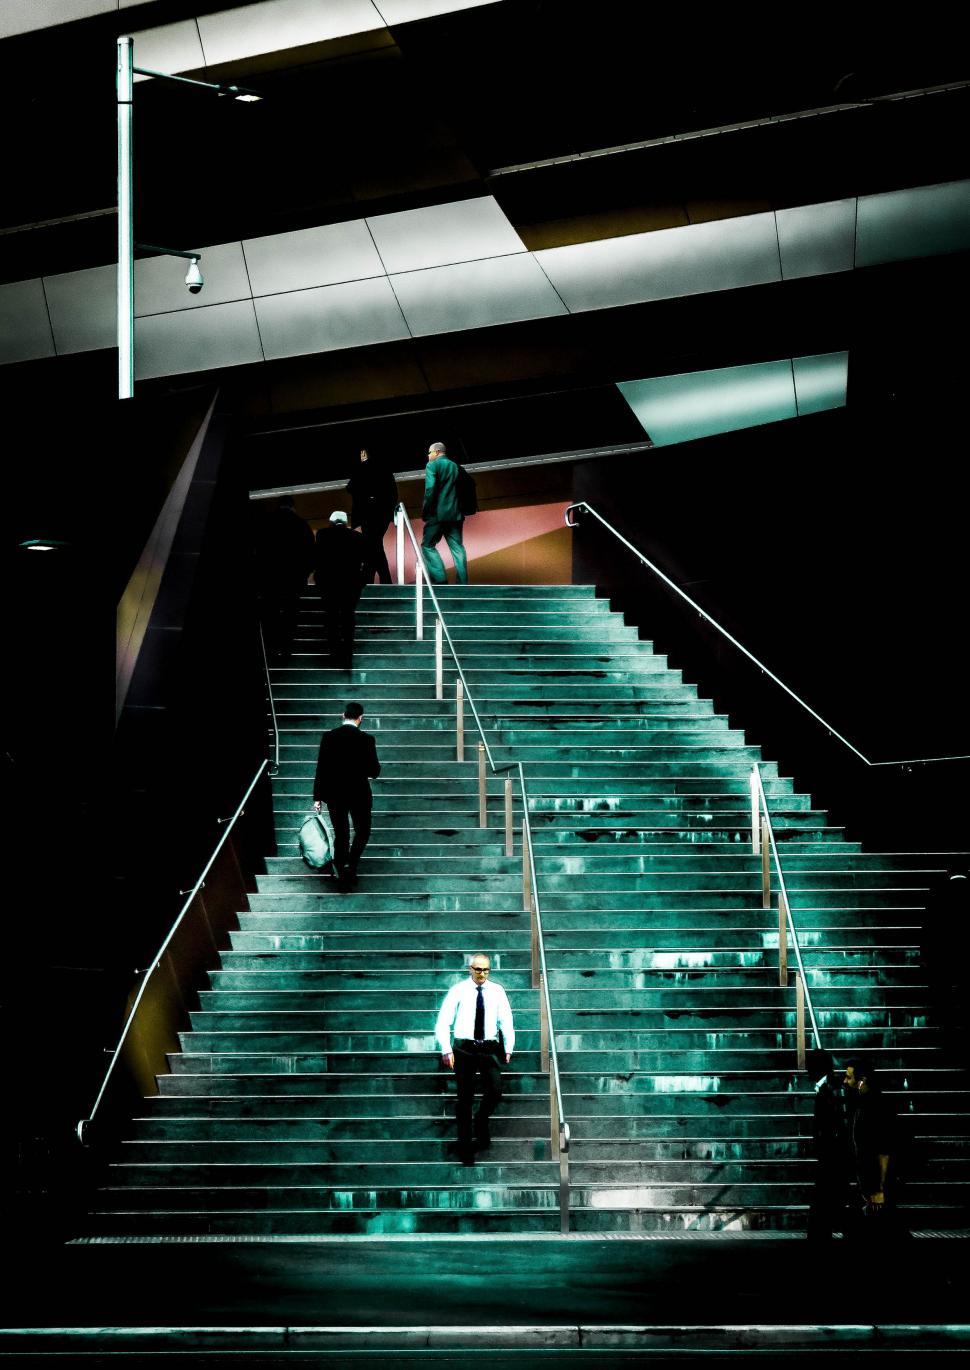 Free Image of Night View of People on stairs  